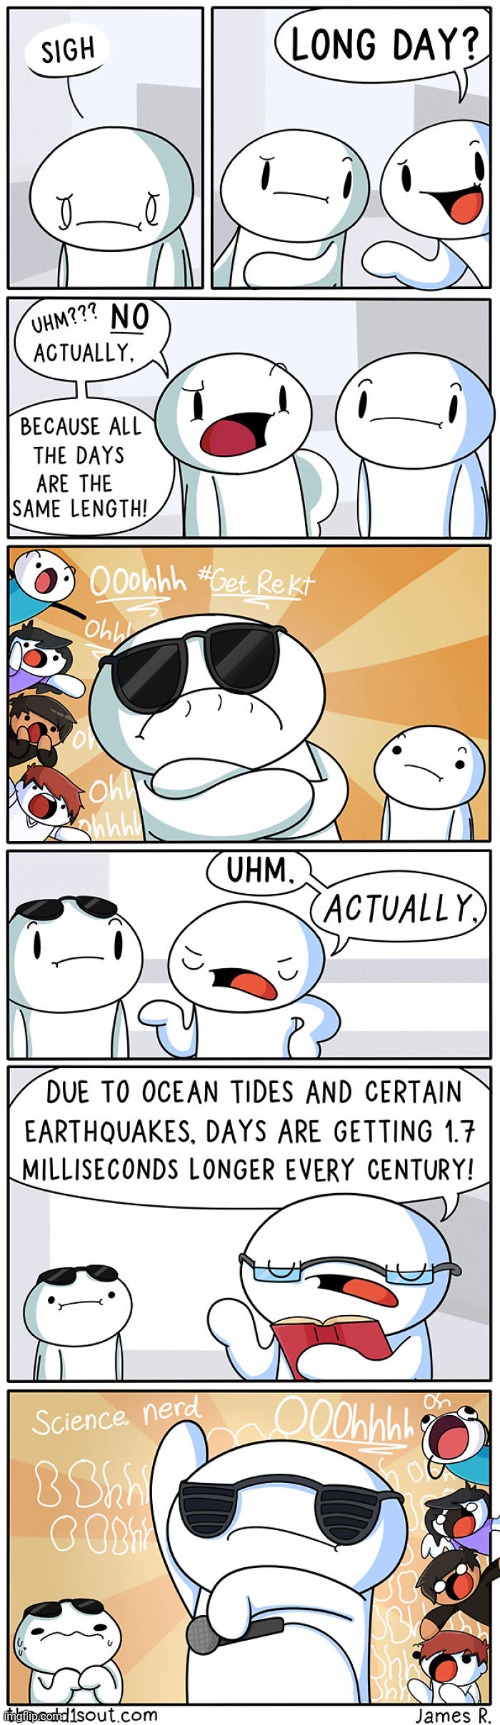 #587 | image tagged in comics,theodd1sout,roasted,get rekt,cool,nerds | made w/ Imgflip meme maker